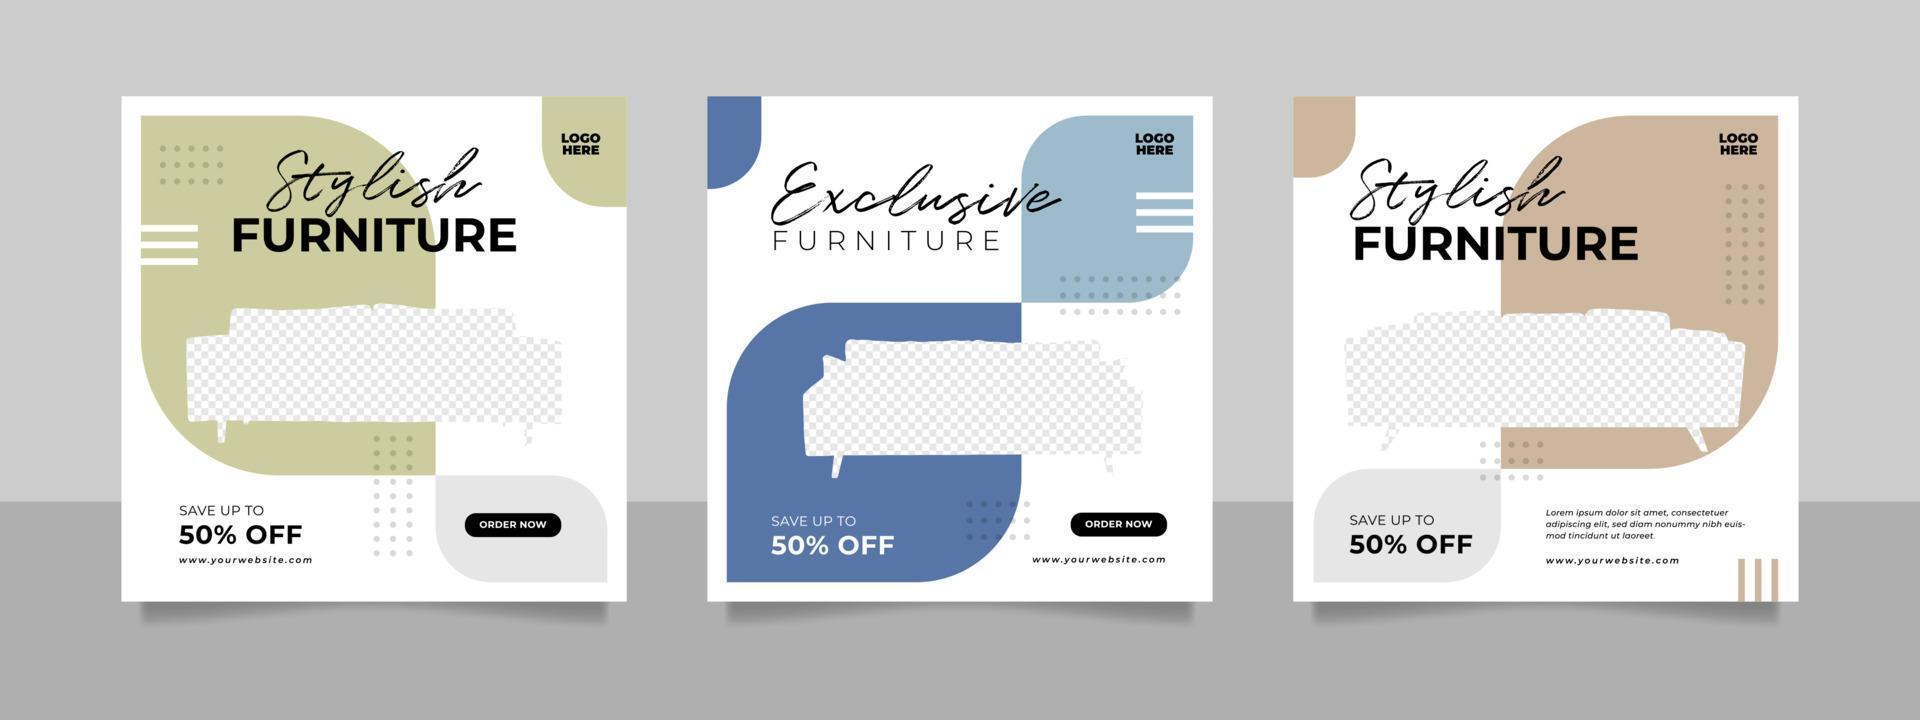 Minimalist furniture and home interior sale banner or social media post template vector